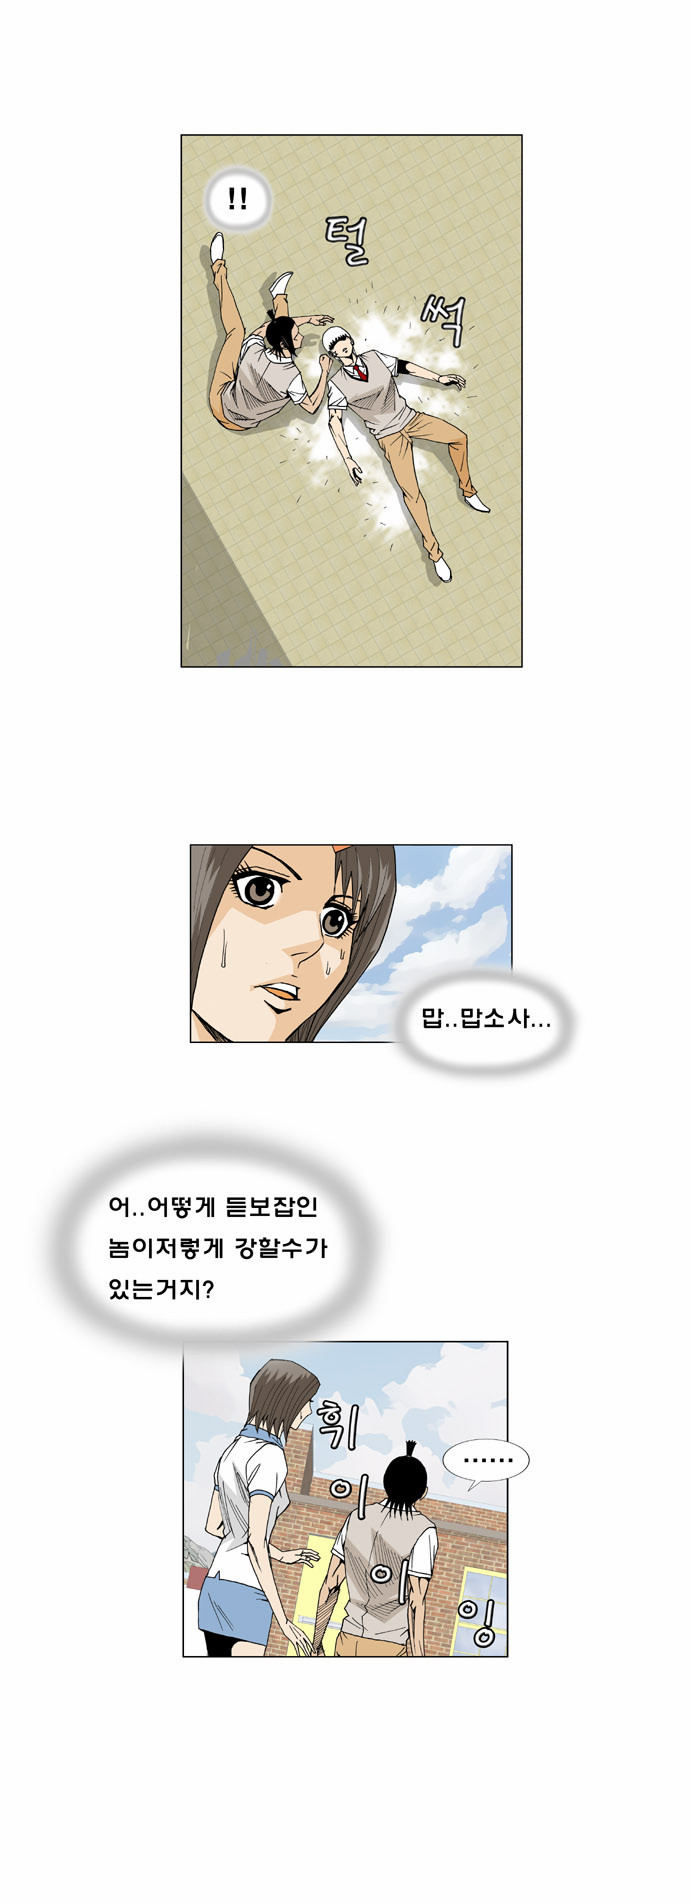 Ultimate Legend - Kang Hae Hyo - Chapter 12 - Page 4